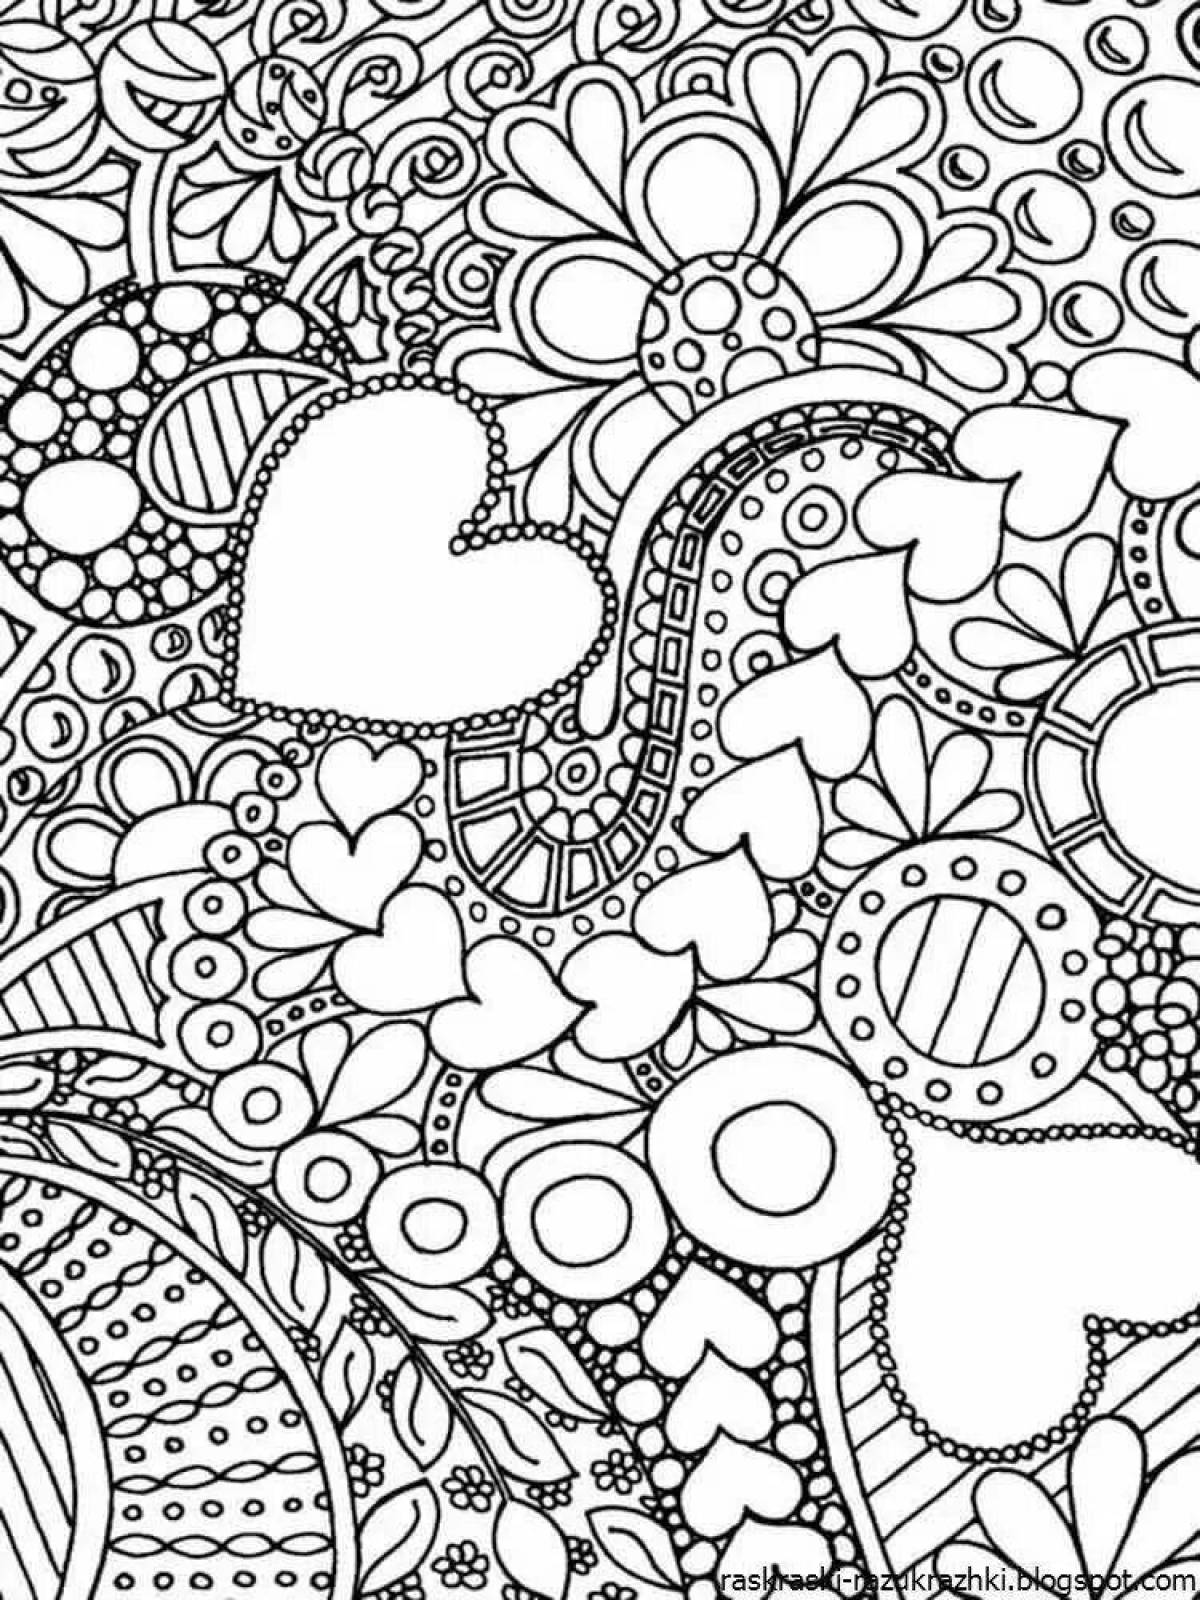 Creative anti-stress coloring book for 13 year old girls